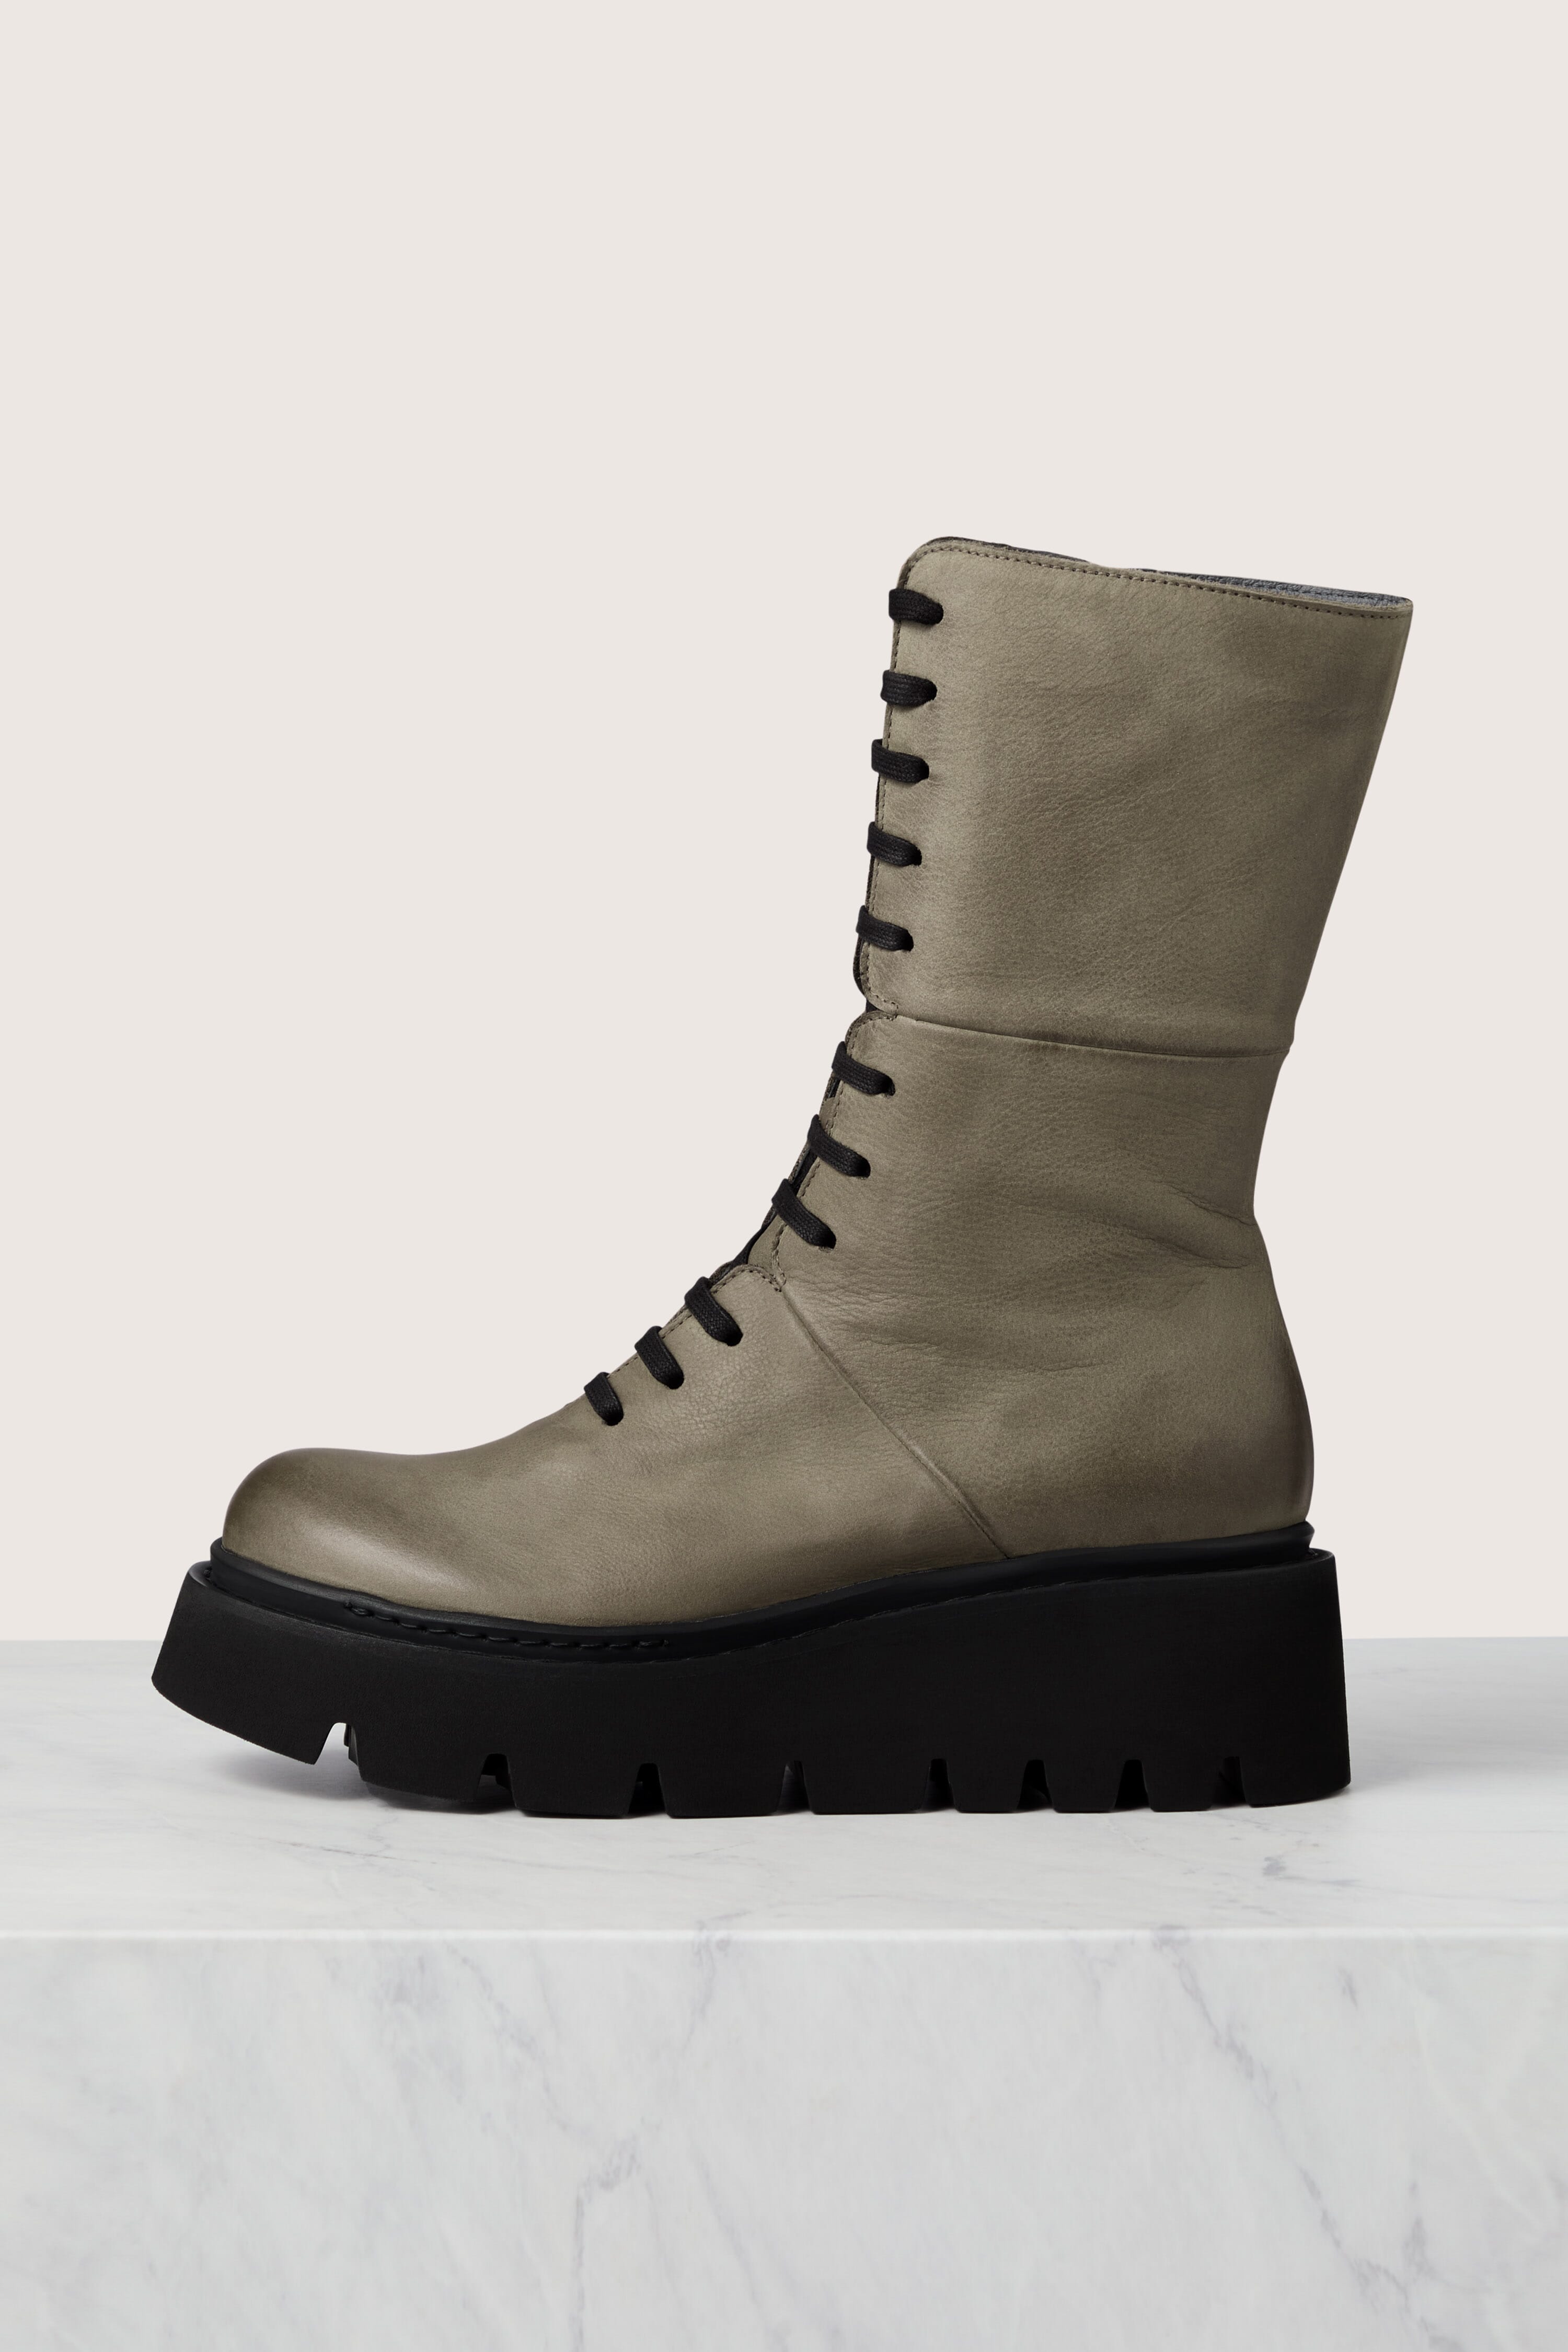 PORTERNA】Baba lace-up boots